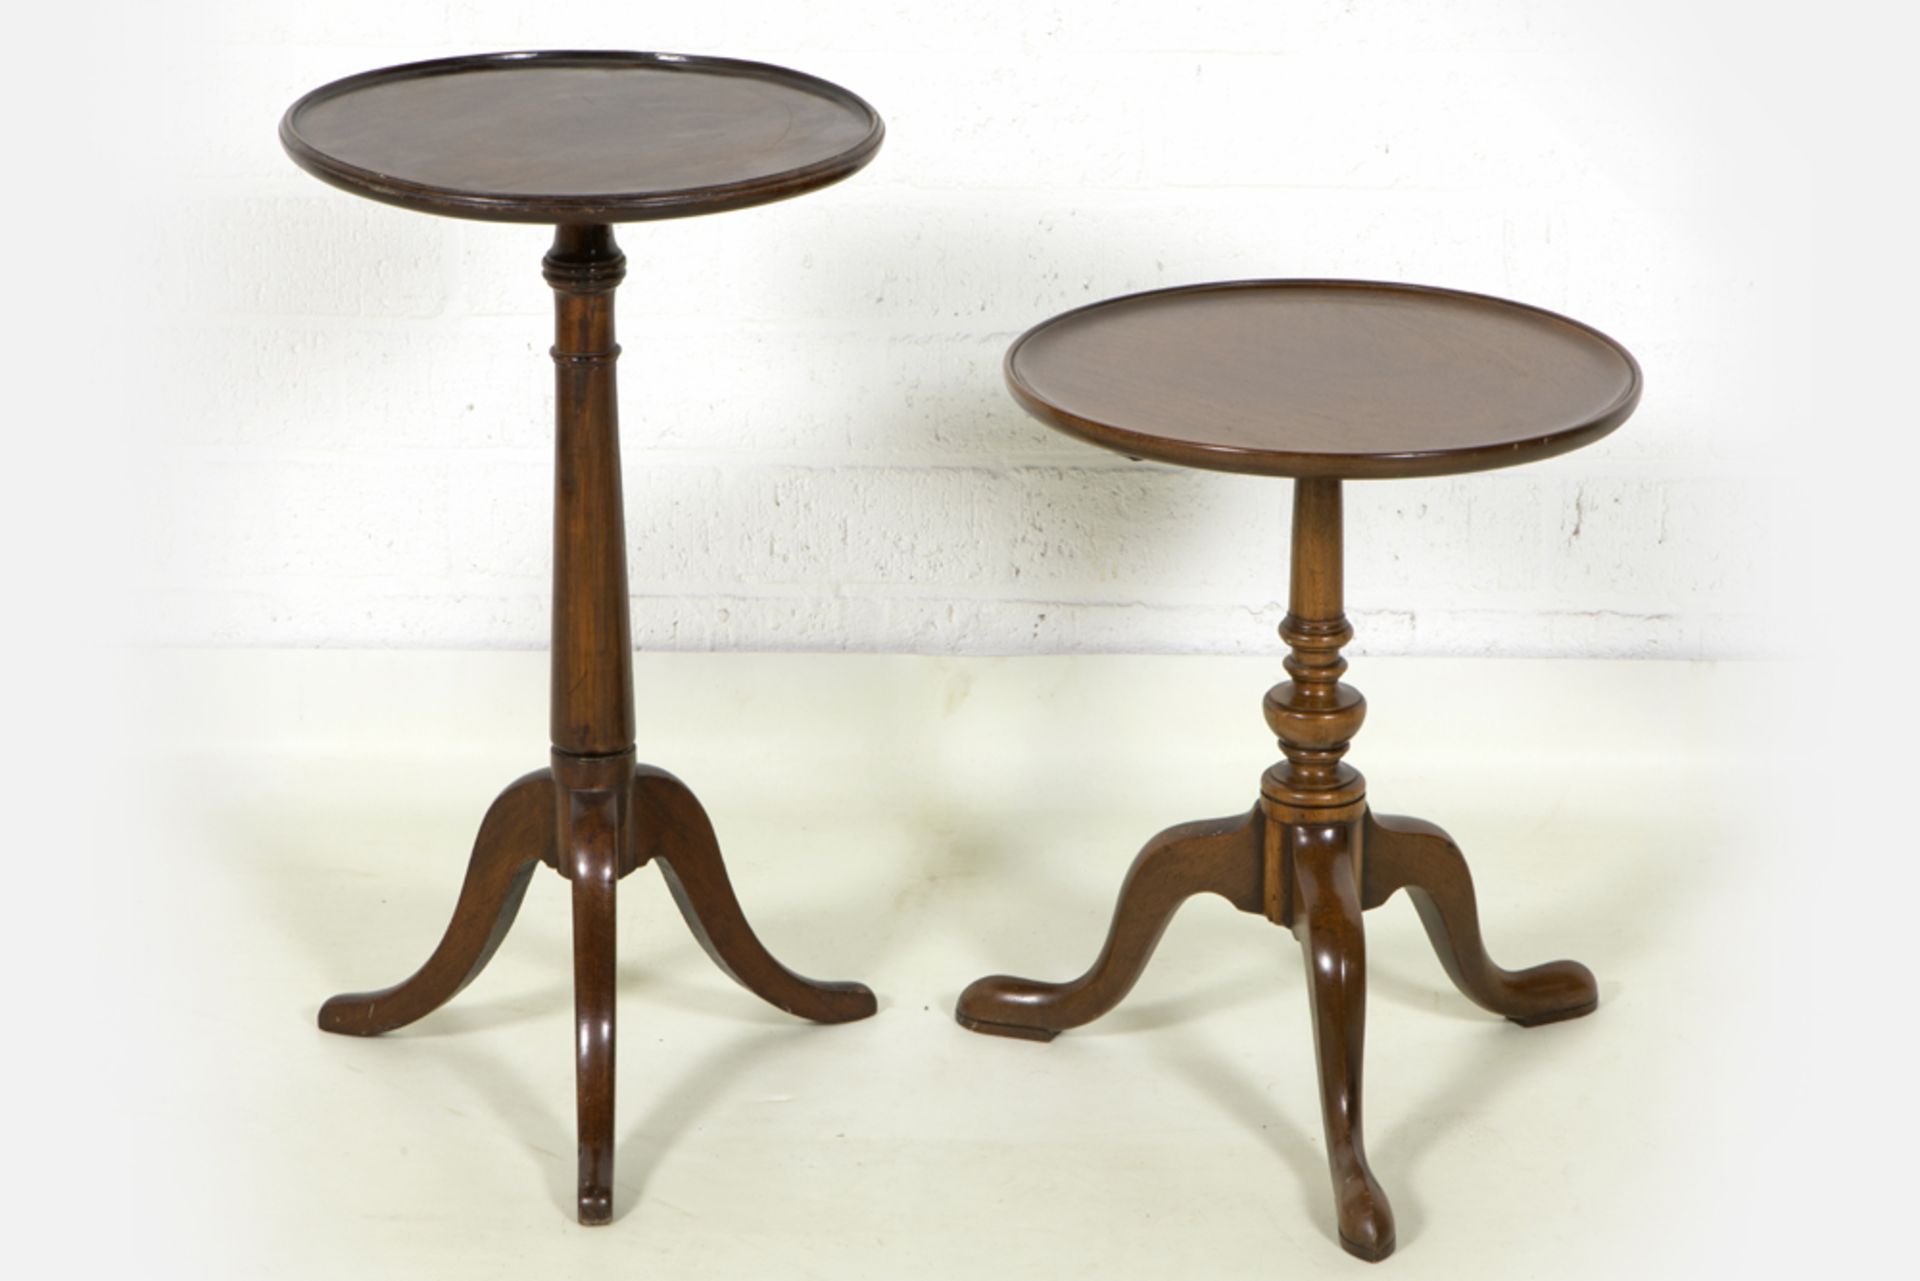 two English occasional tables with round top in mahogany - one is 19th Cent. || Lot van twee Engelse